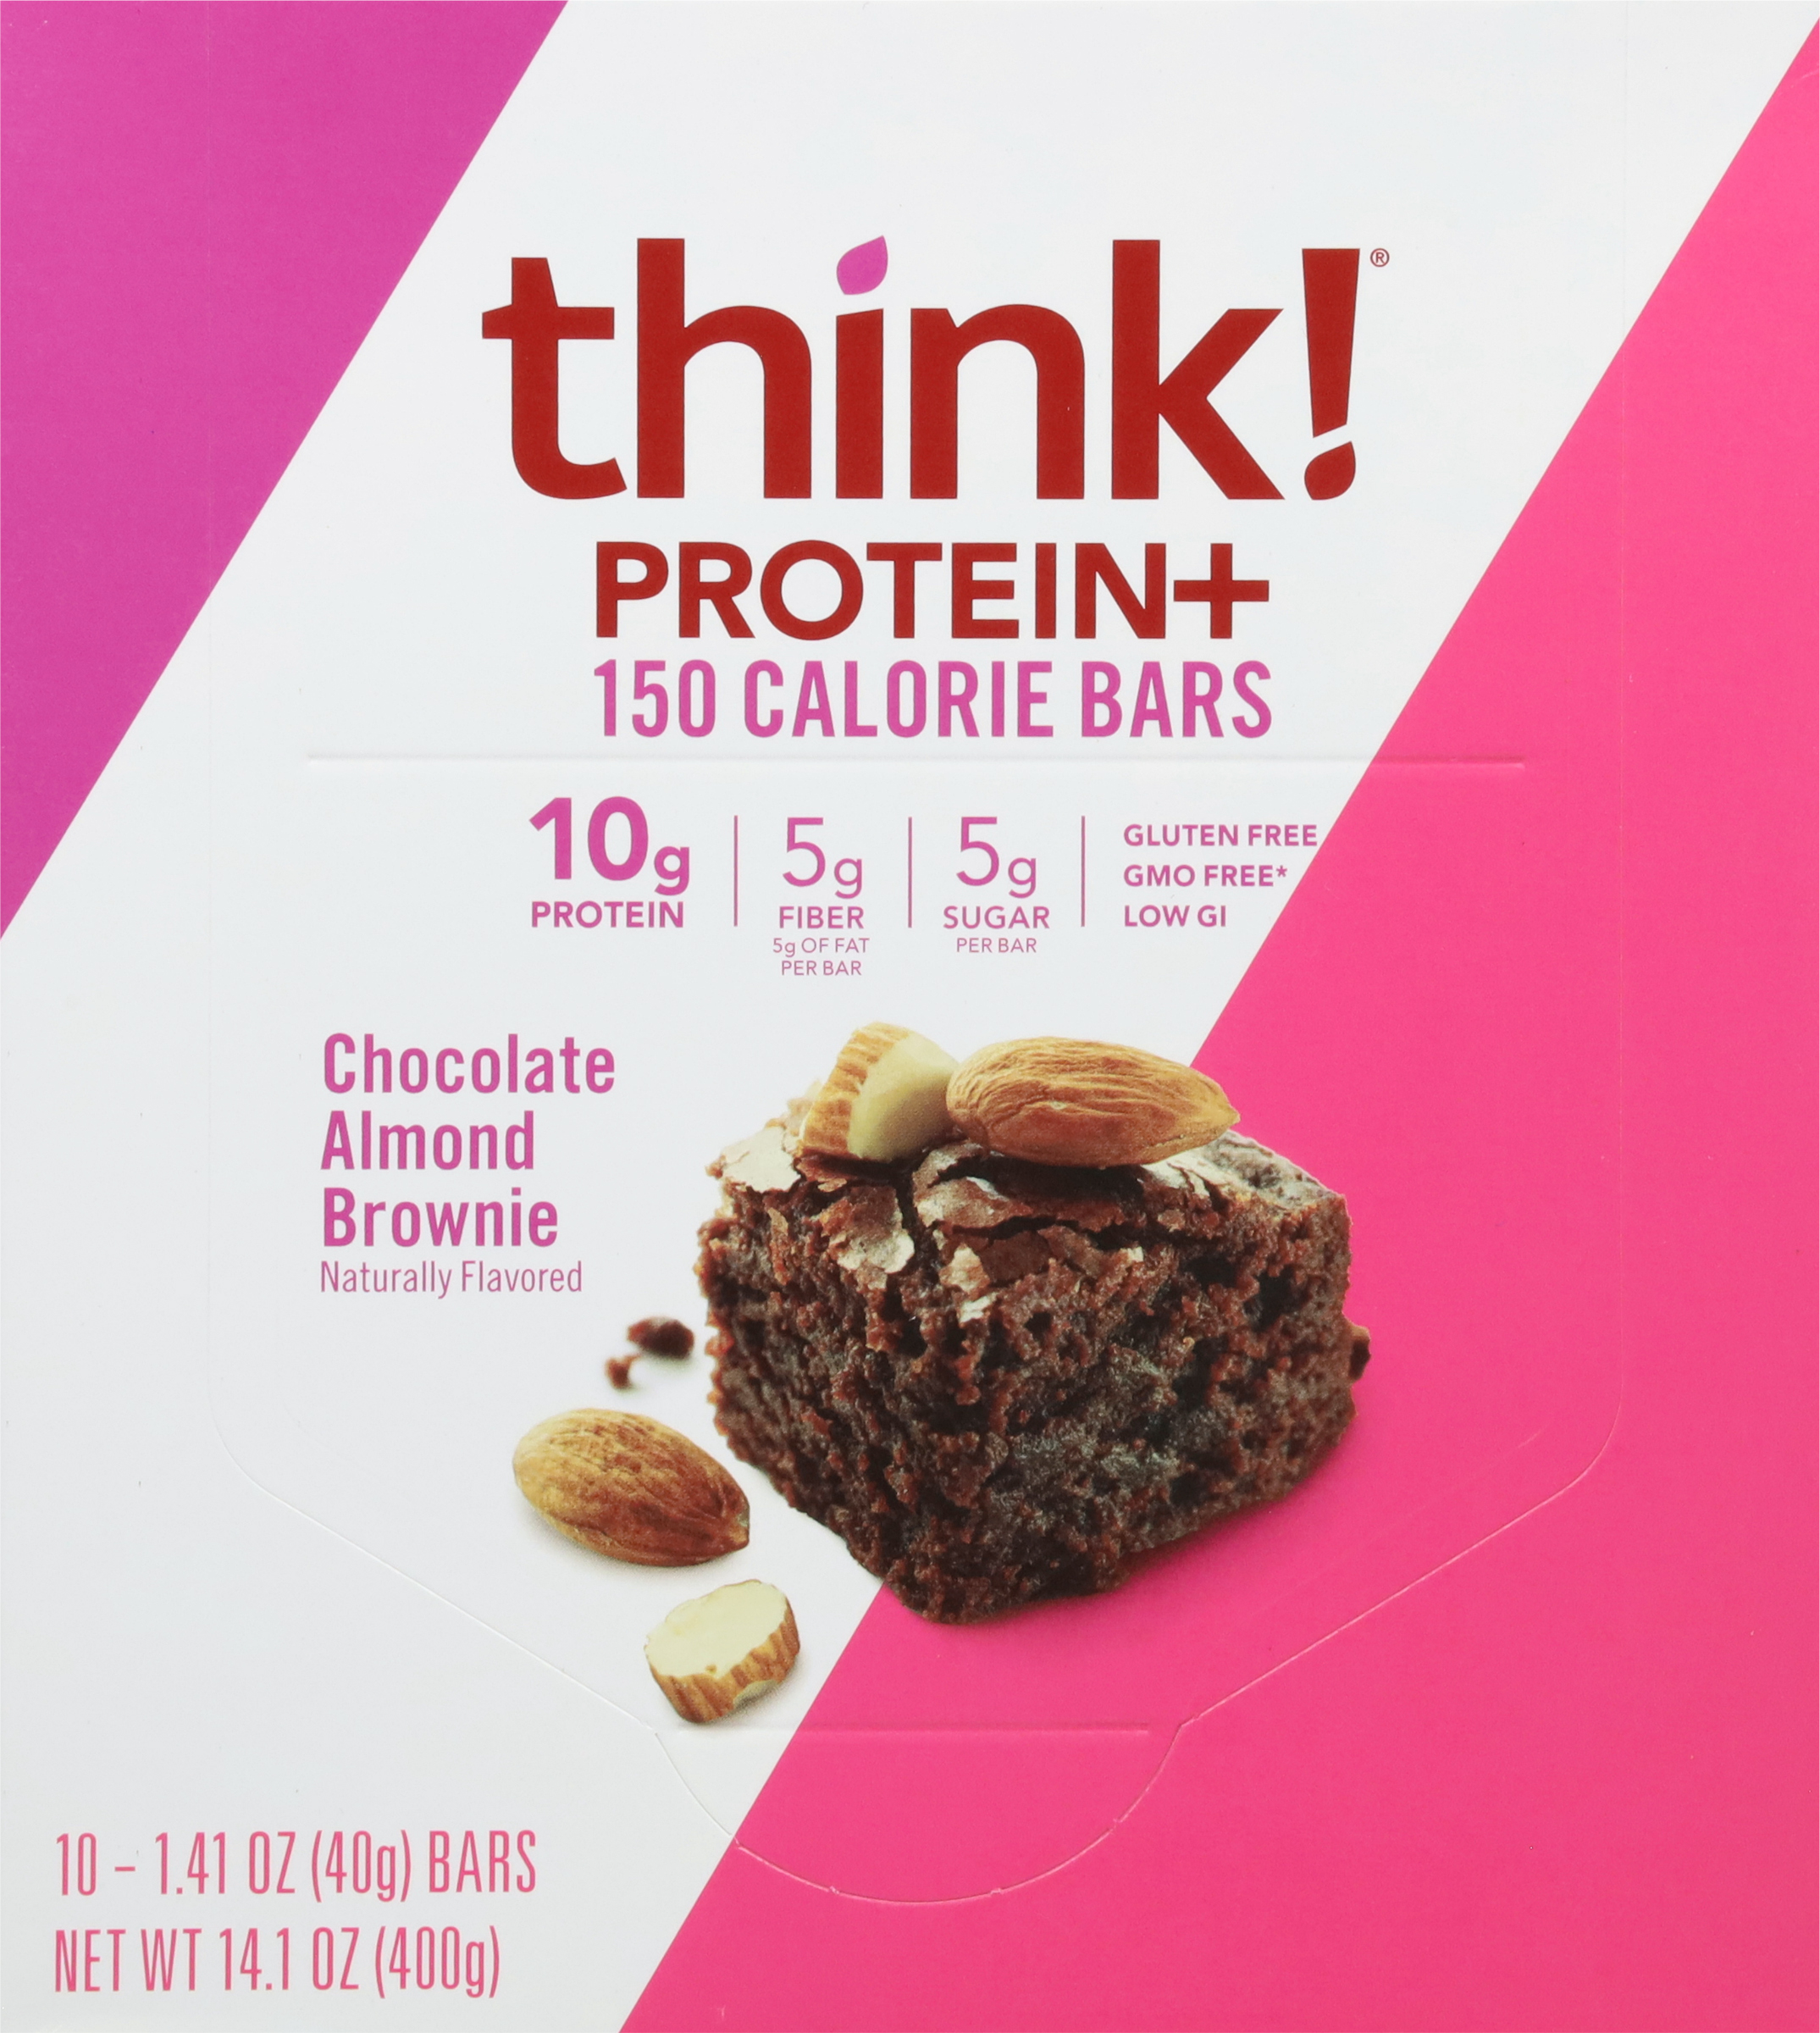 150 Calorie Bars, Chocolate Almond Brownie, Protein+, 10 Pack image